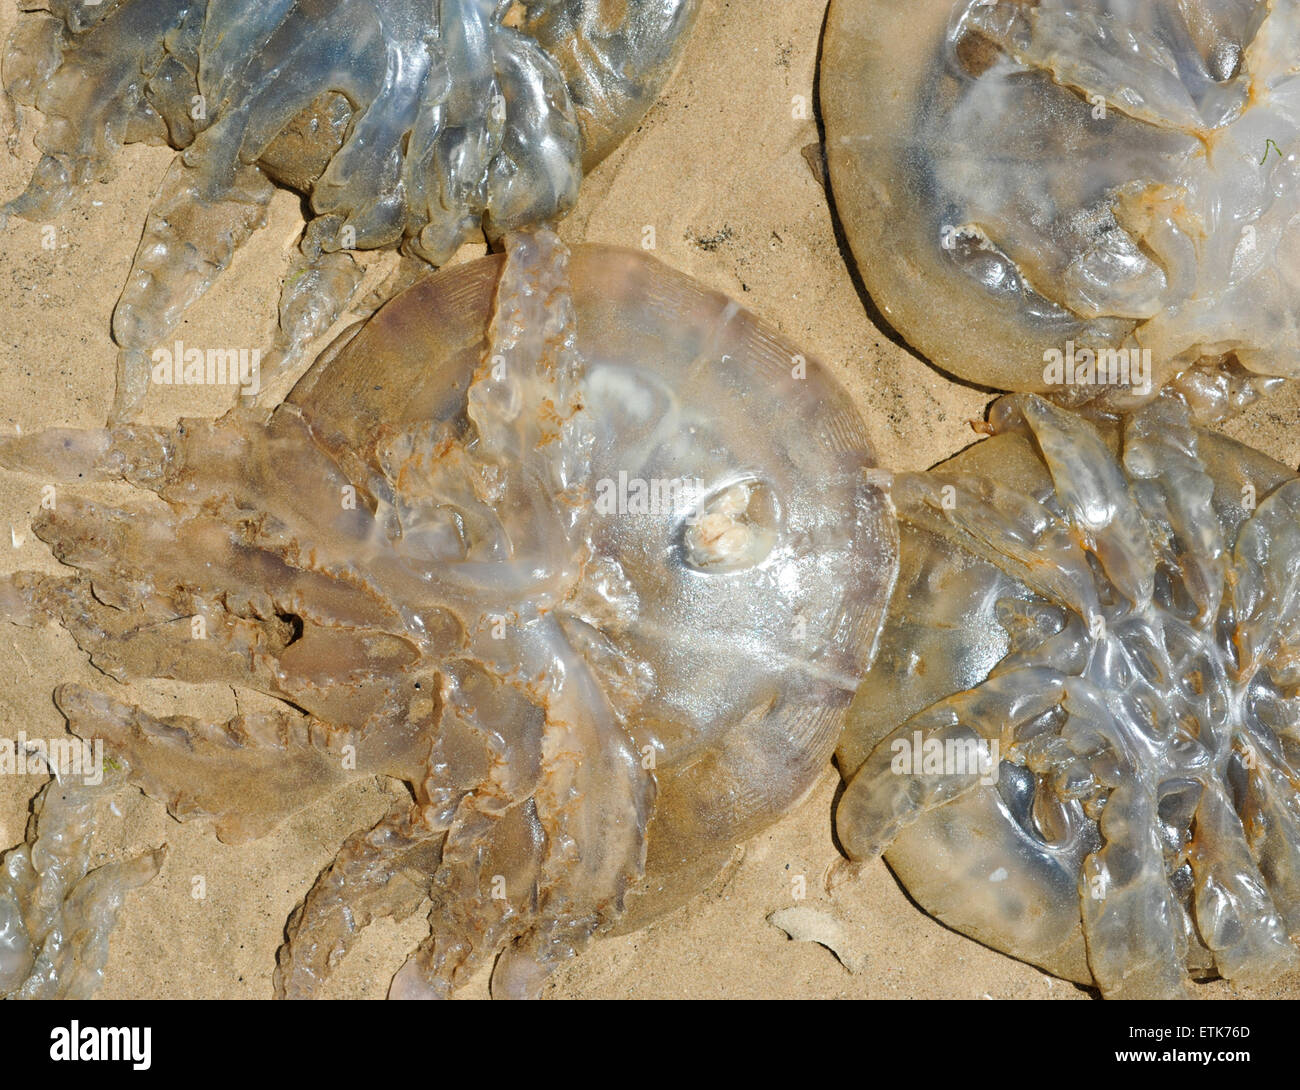 South Wales, UK, Sunday 14th June 2015. Thousands of jellyfish are washed-up on Pembrey Sands (Cefn Sidan), Pembrey Country Park, near Llanelli, Carmarthenshire, Wales, UK. The jellyfish, forming a long and continuous strip along the beach, became stranded along the eight miles of coast due to its vast tidal range.   Pictured is a close-up of a jellyfish along the beach. Credit:  Algis Motuza/Alamy Live News Stock Photo